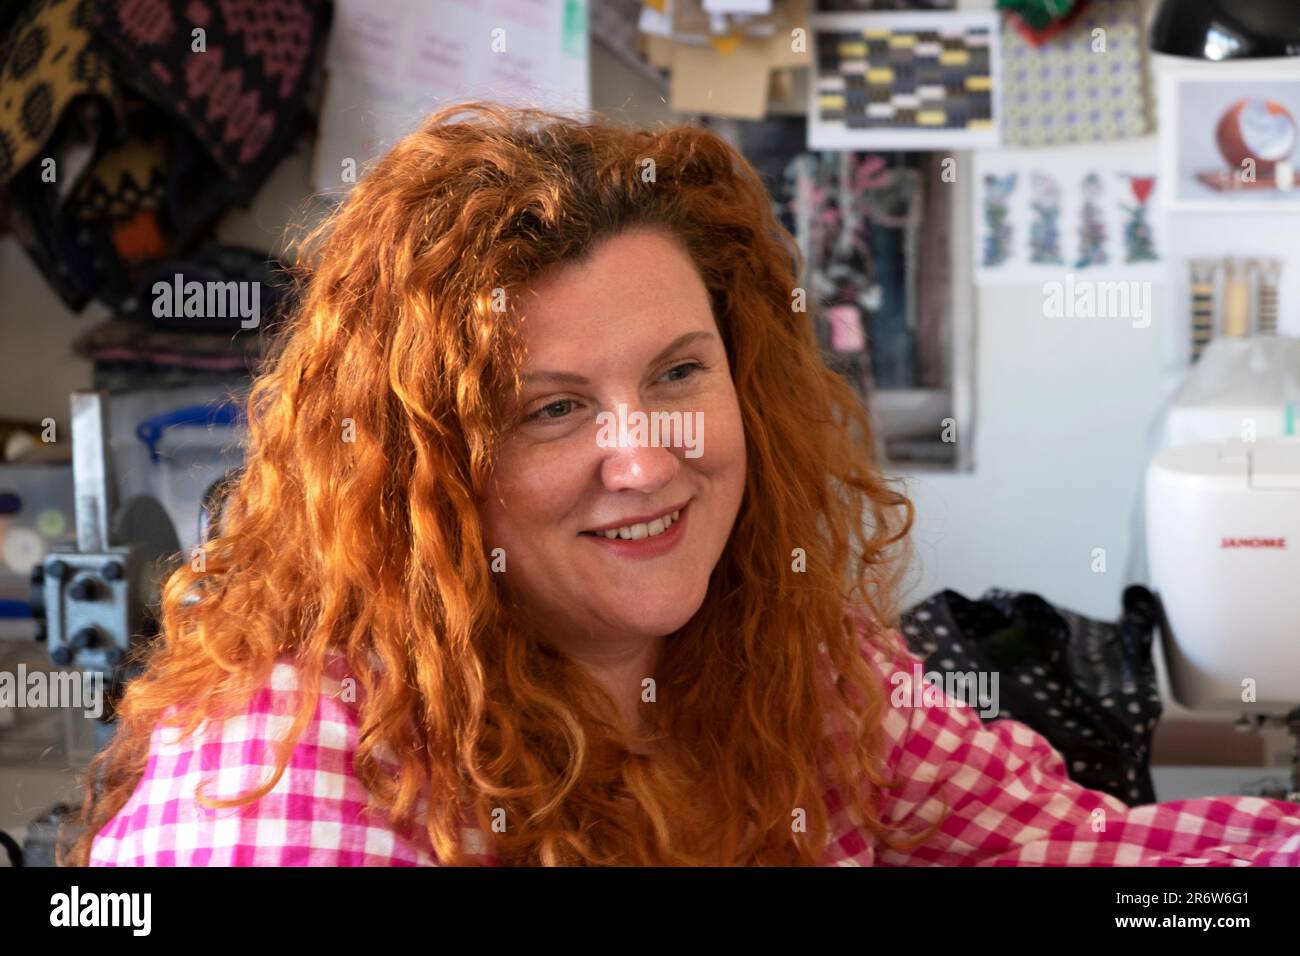 Stacey Grant-Canham of Black & Beech feminist fashion networking at The Welsh Girl shop during Hay Festival 2023 Hay-on-Wye Wales UK  KATHY DEWITT Stock Photo